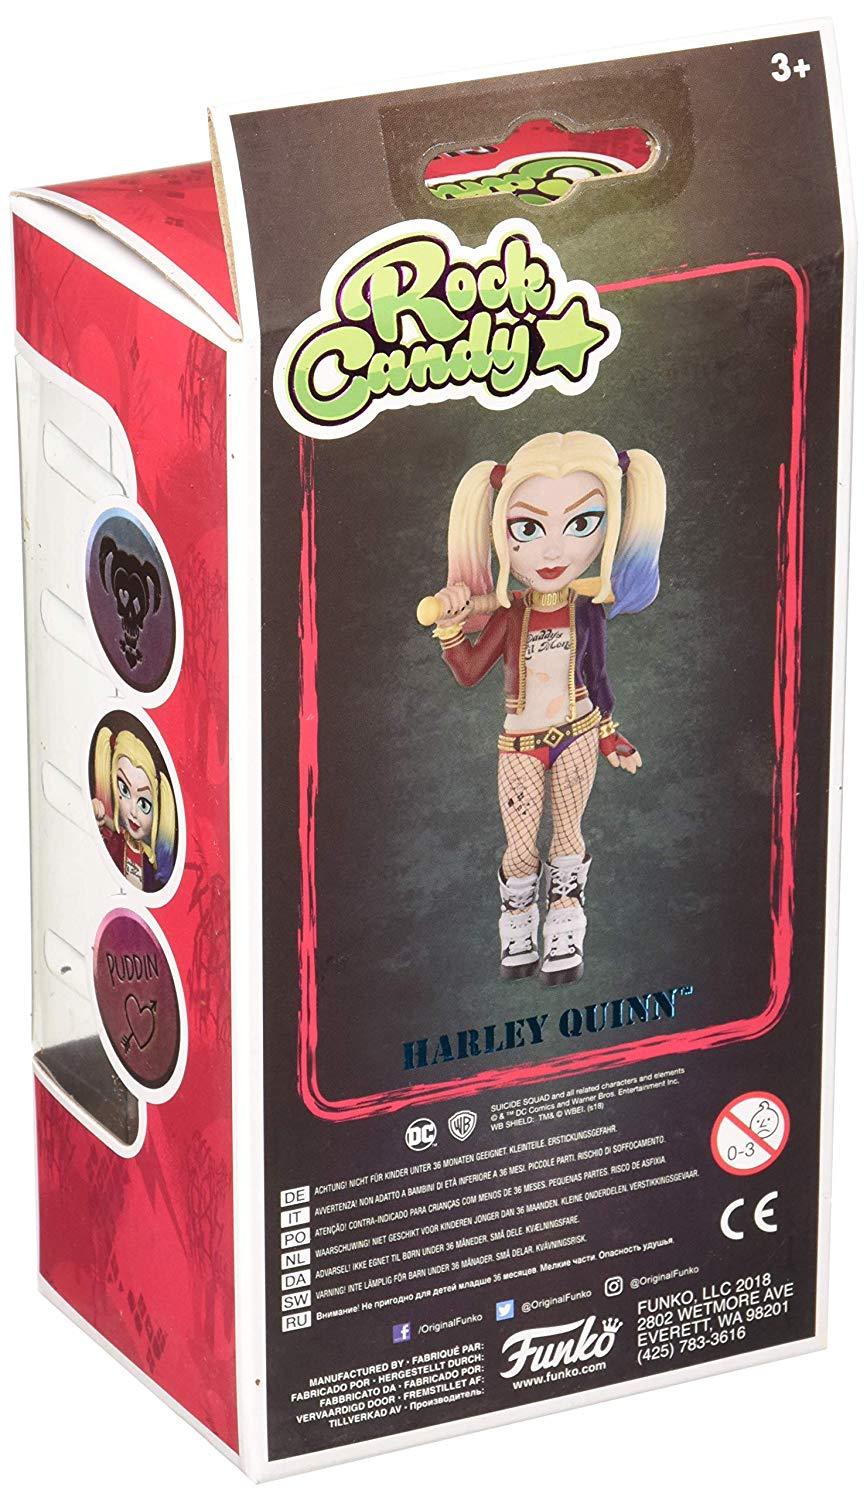 Funko Rock Candy: Suicide Squad - Harley Quinn - Nerd Arena